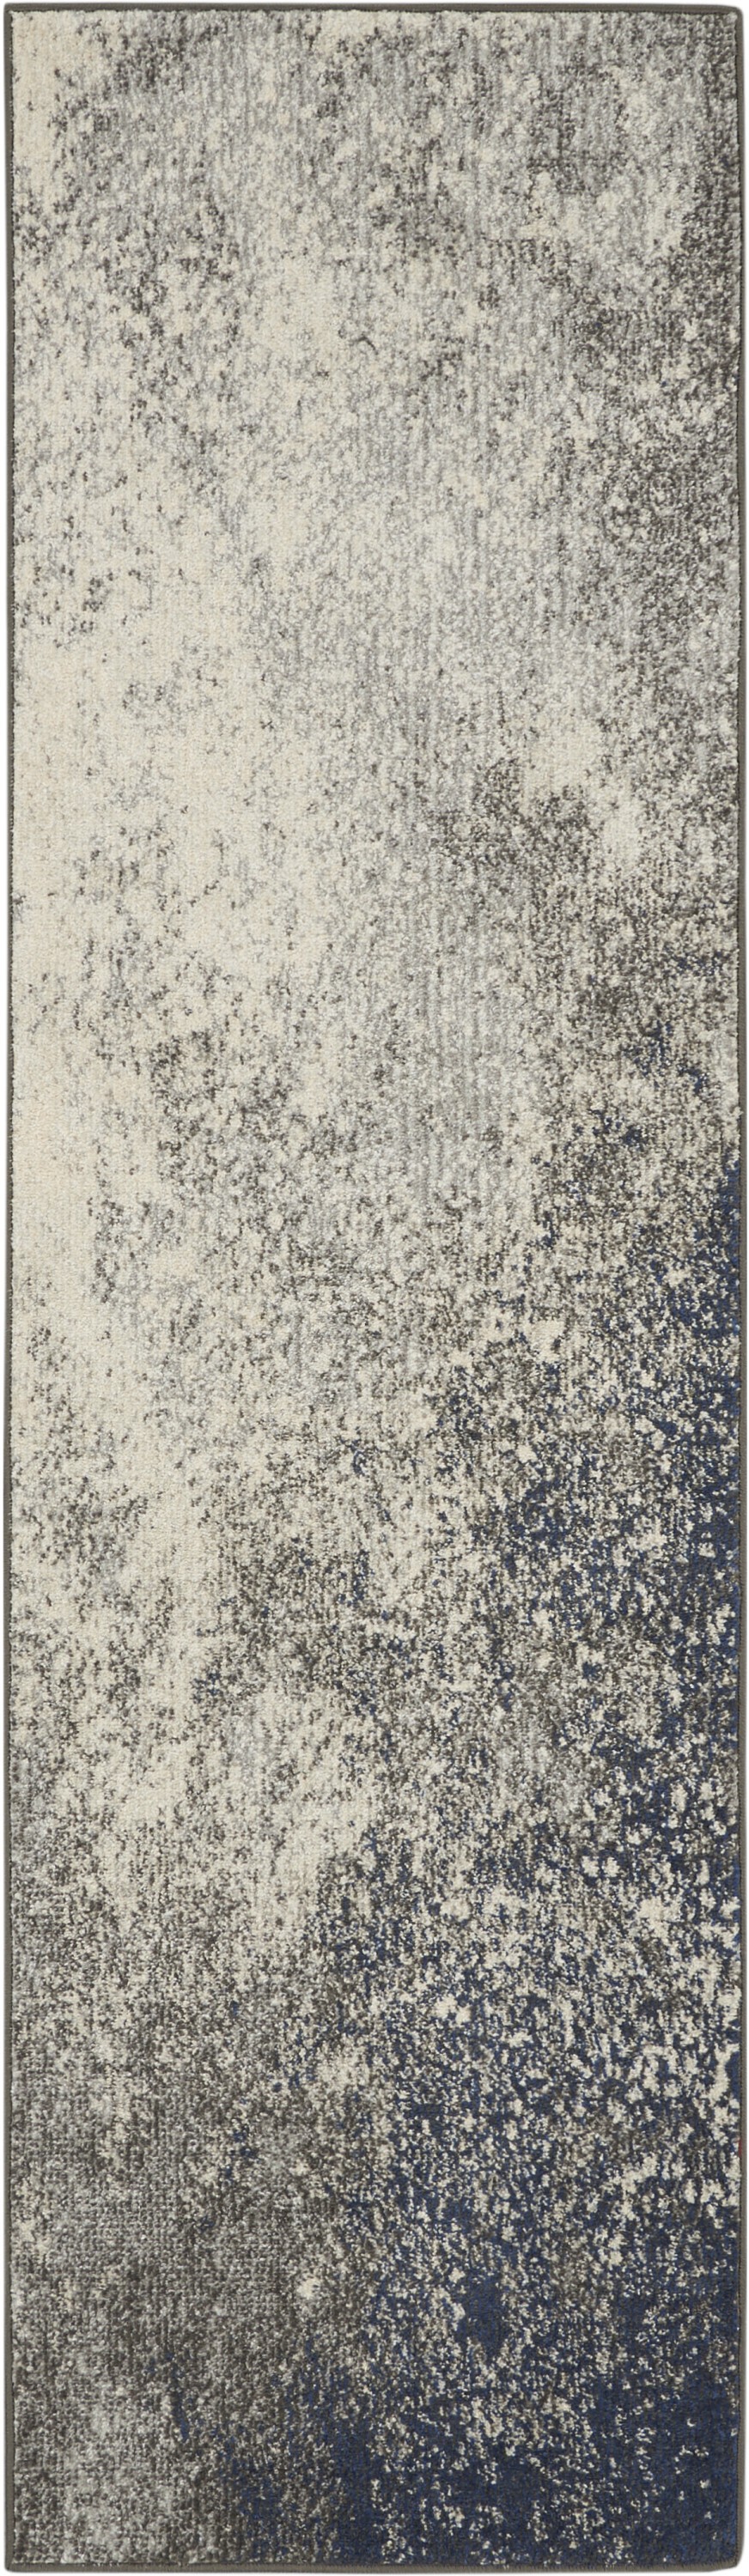 8' Gray And Ivory Abstract Power Loom Runner Rug-385291-1